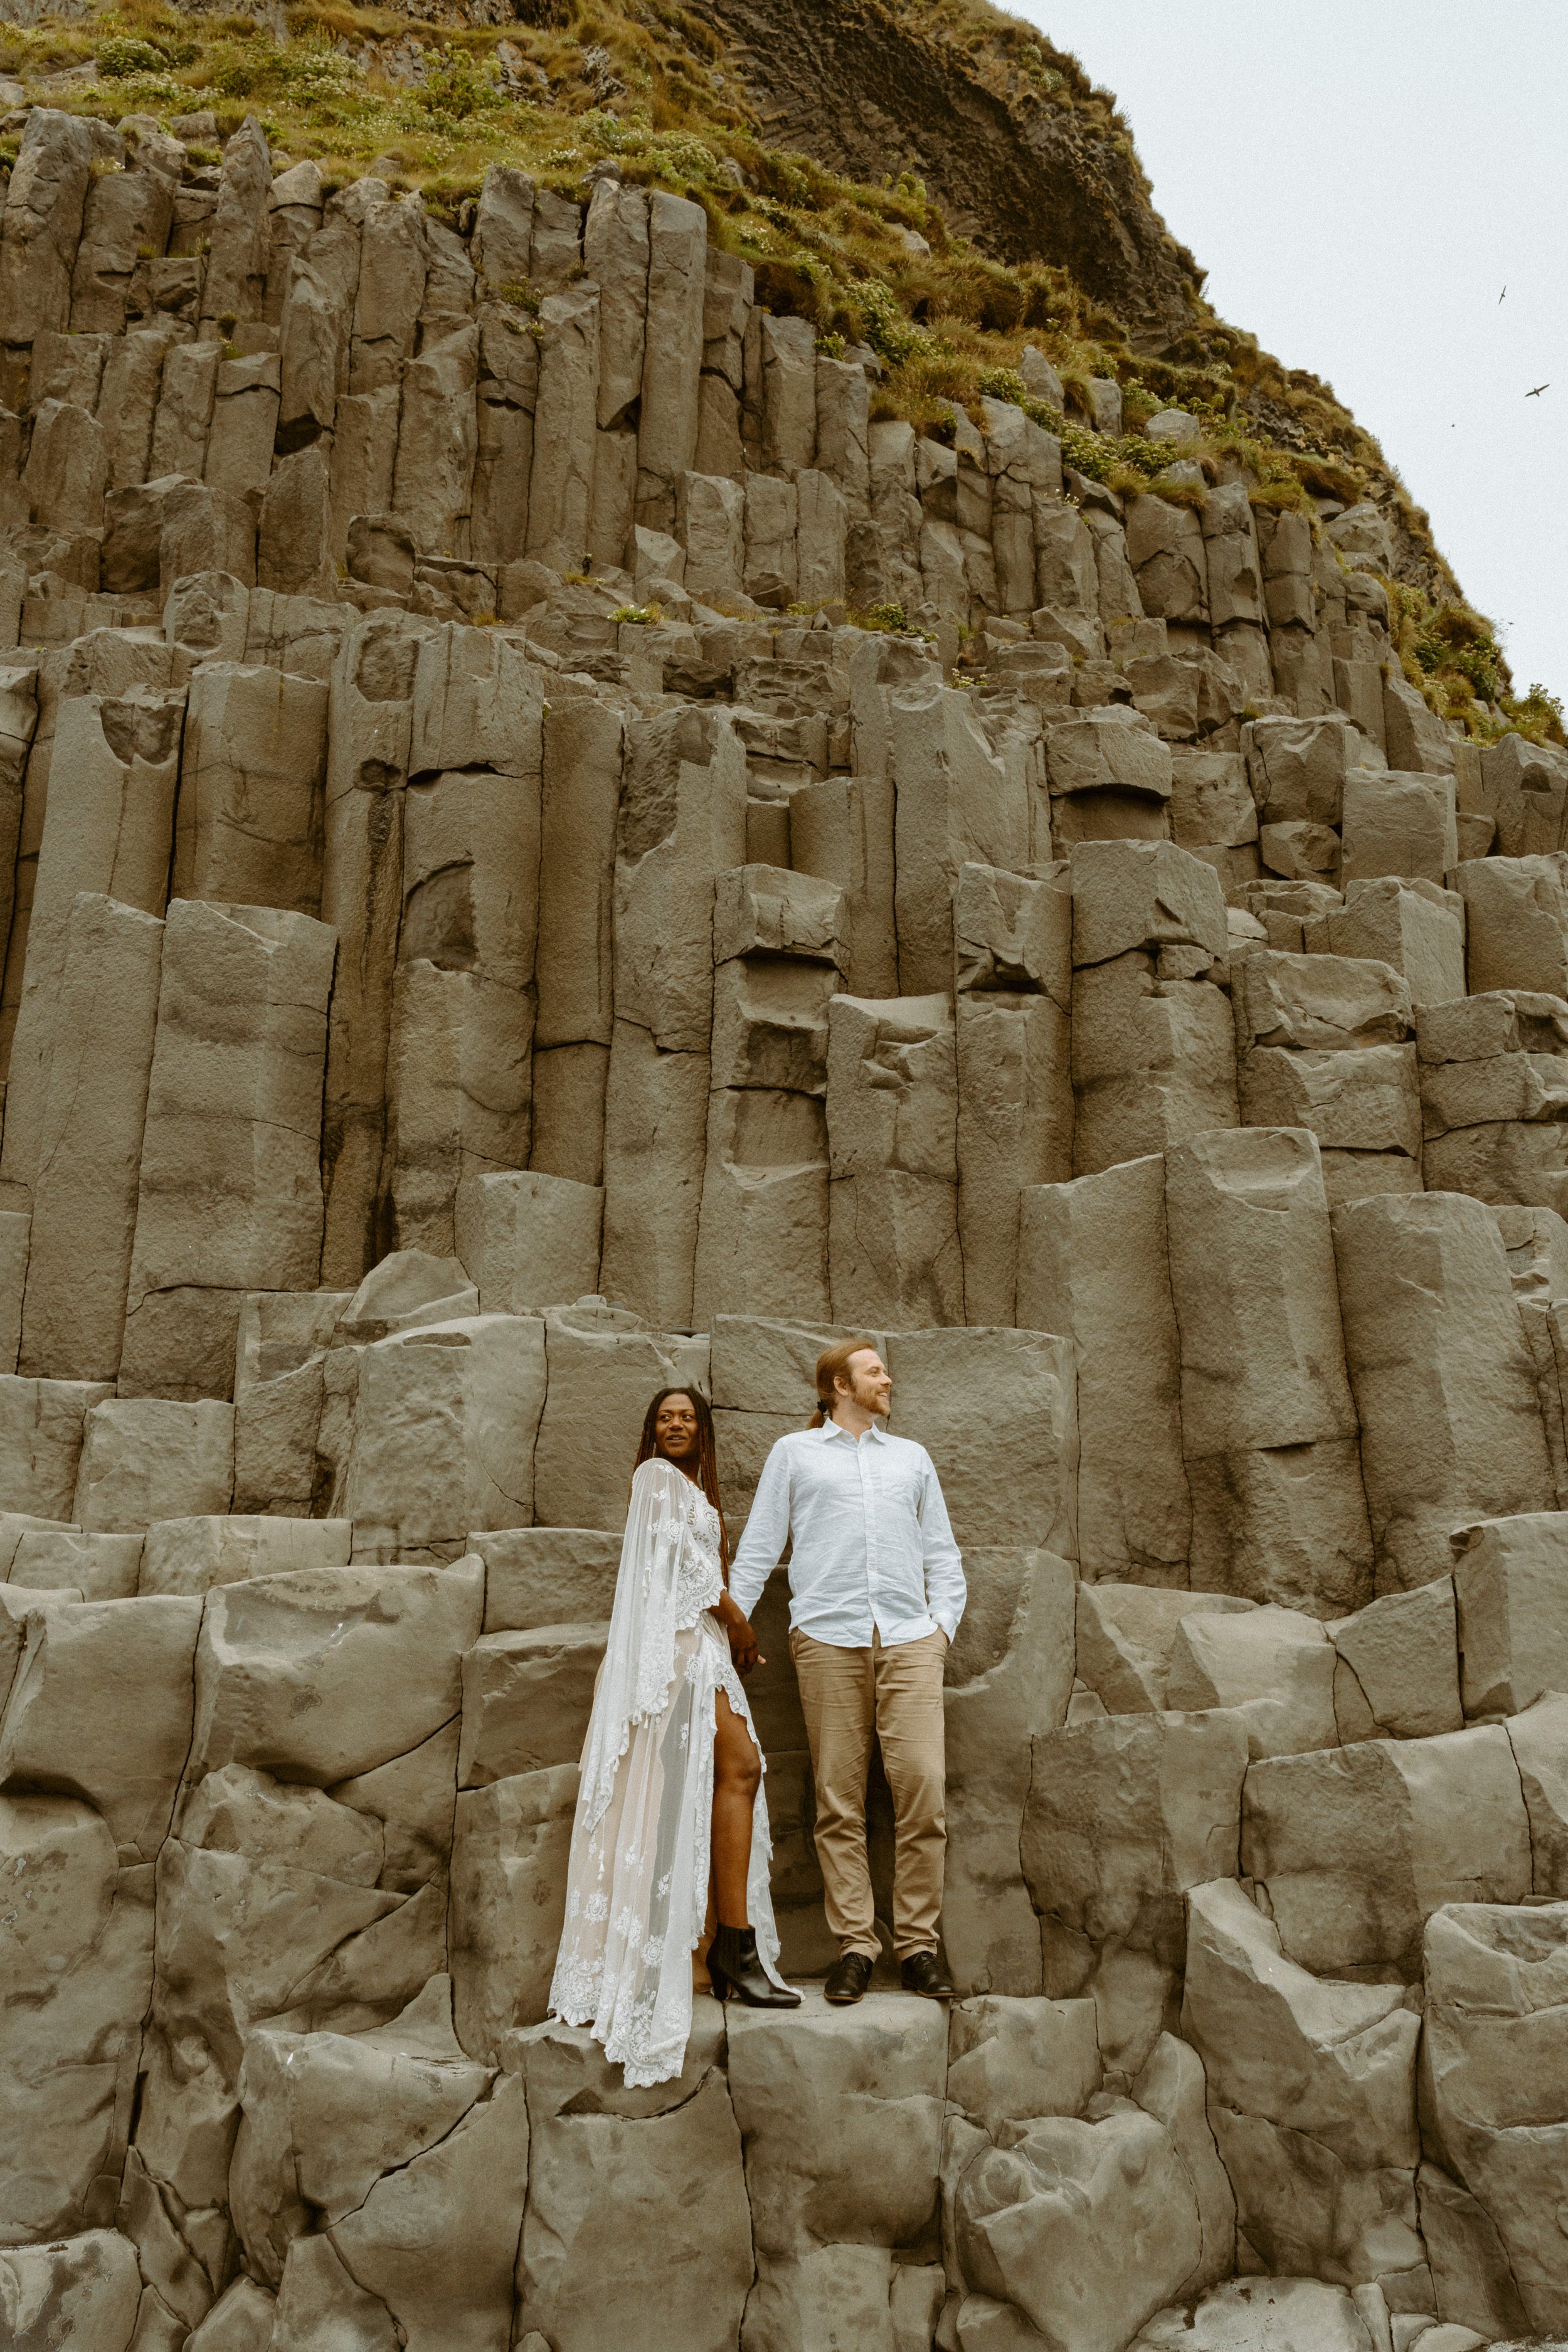 How to Elope in Iceland | Iceland Adventure Wedding Guide | Best Places to Elope | Destination Elopement Planning | Iceland Elopement Photographer